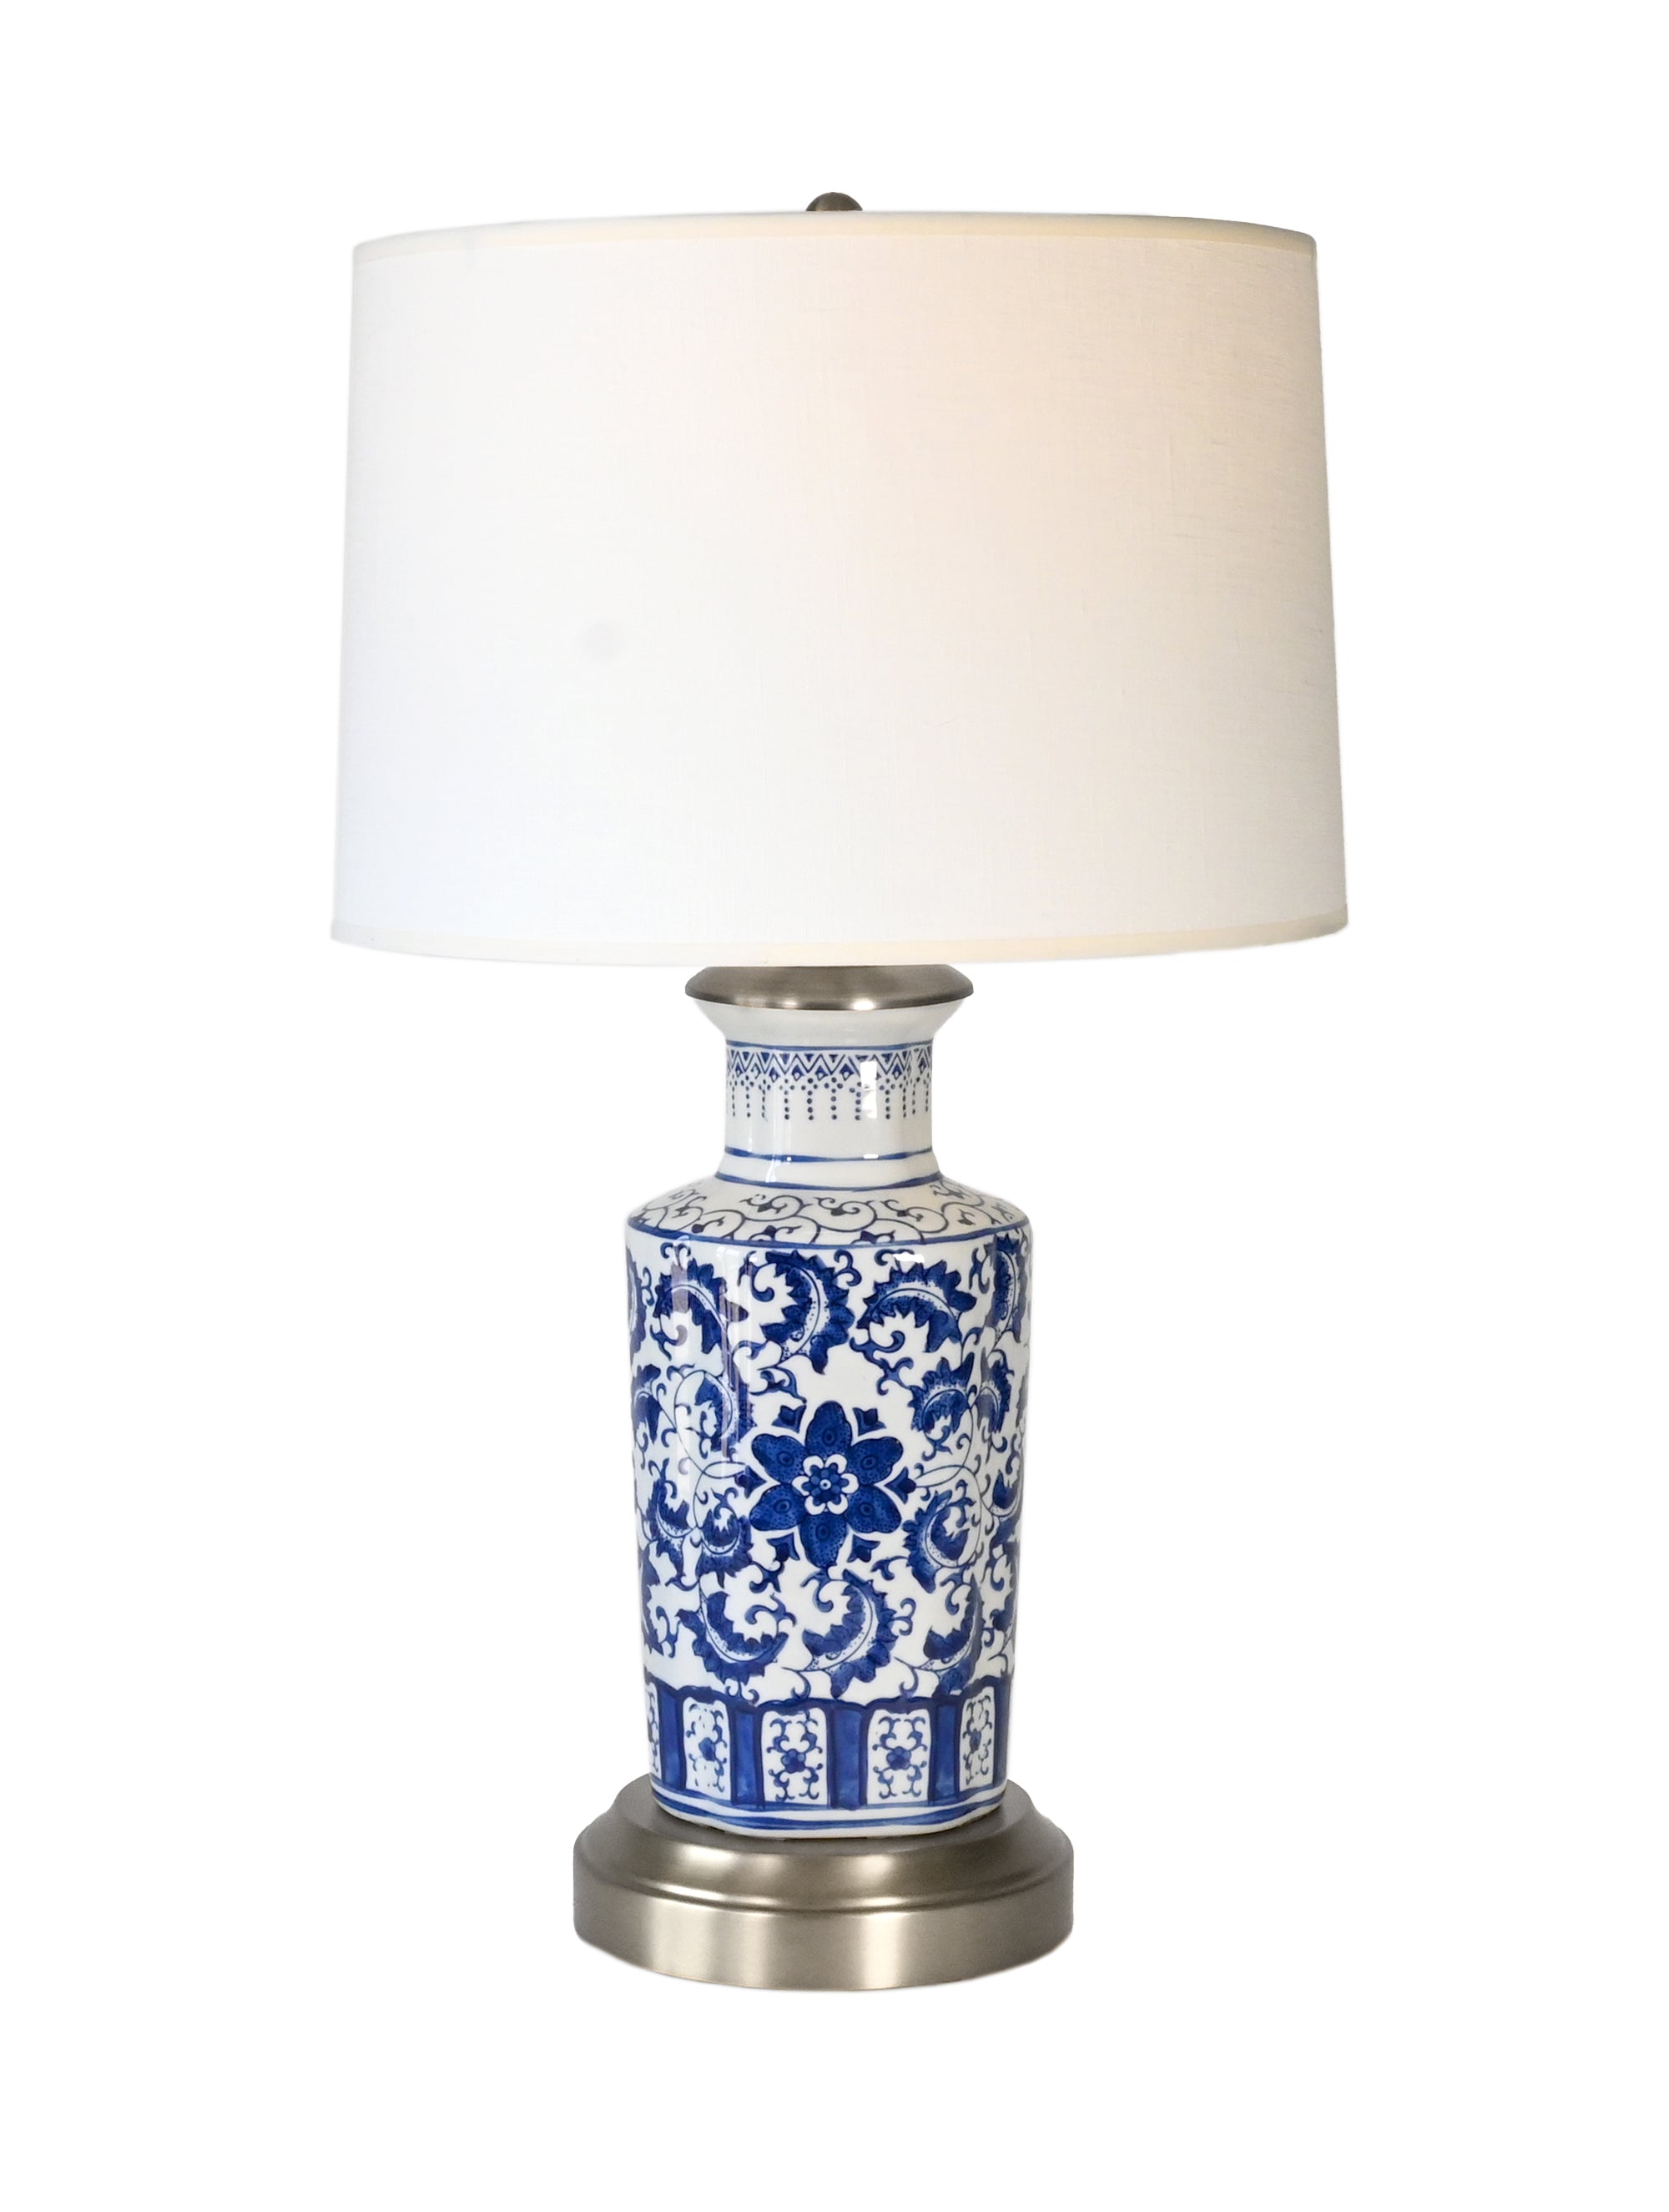 blue and white porcelain cordless lamp on nickel metal